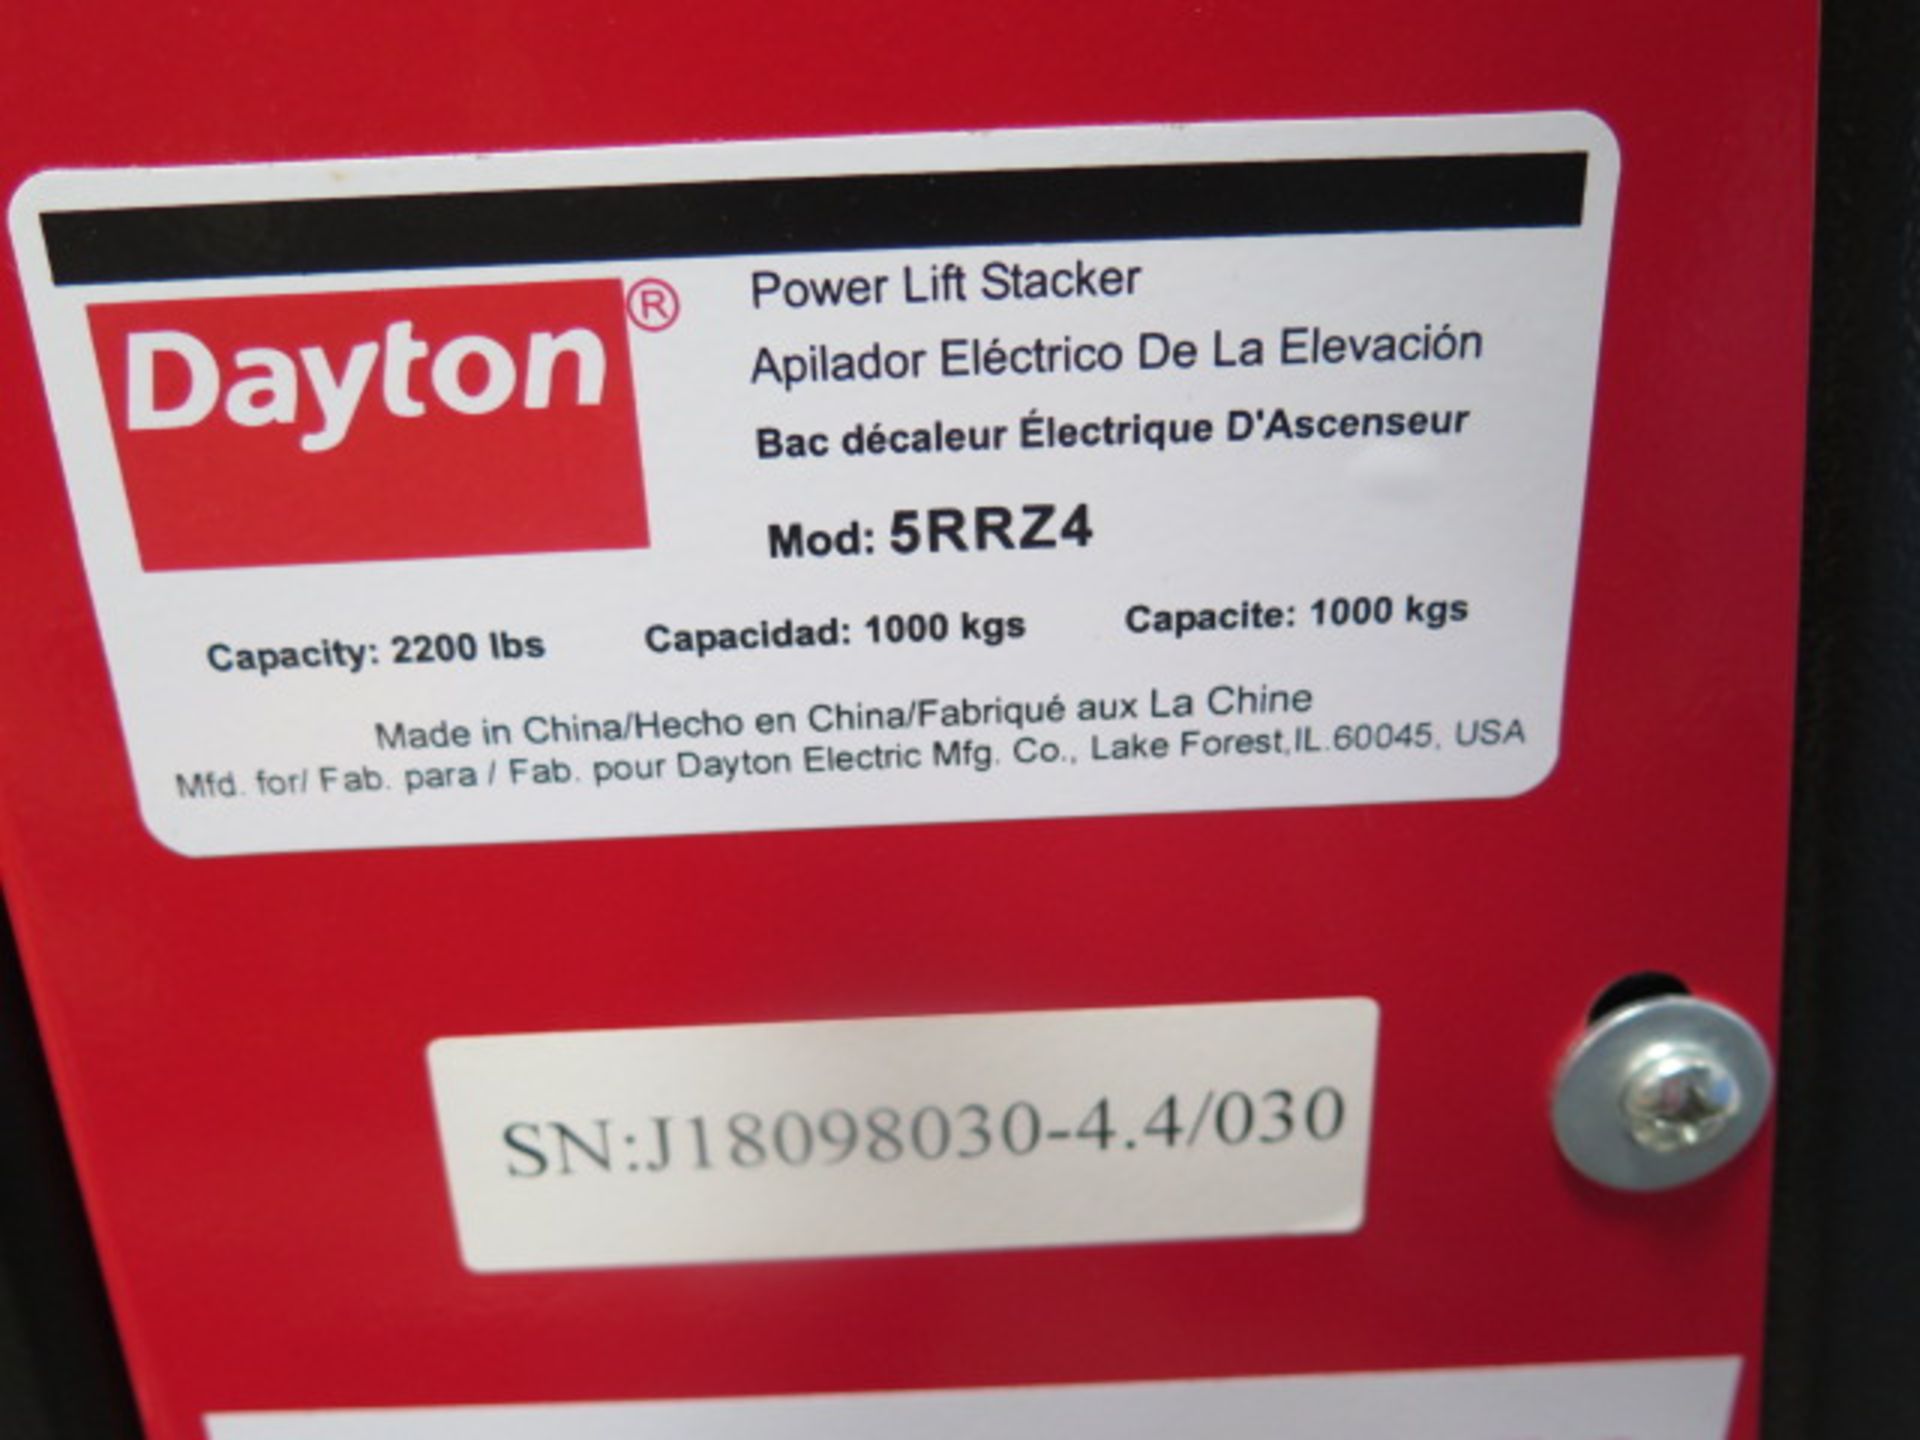 Dayton 5RRZ4 2200 Lb Cap Electric Pallet Mover s/n J18098030-4.4/030 w/ Charger SOLD AS-IS - Image 12 of 12